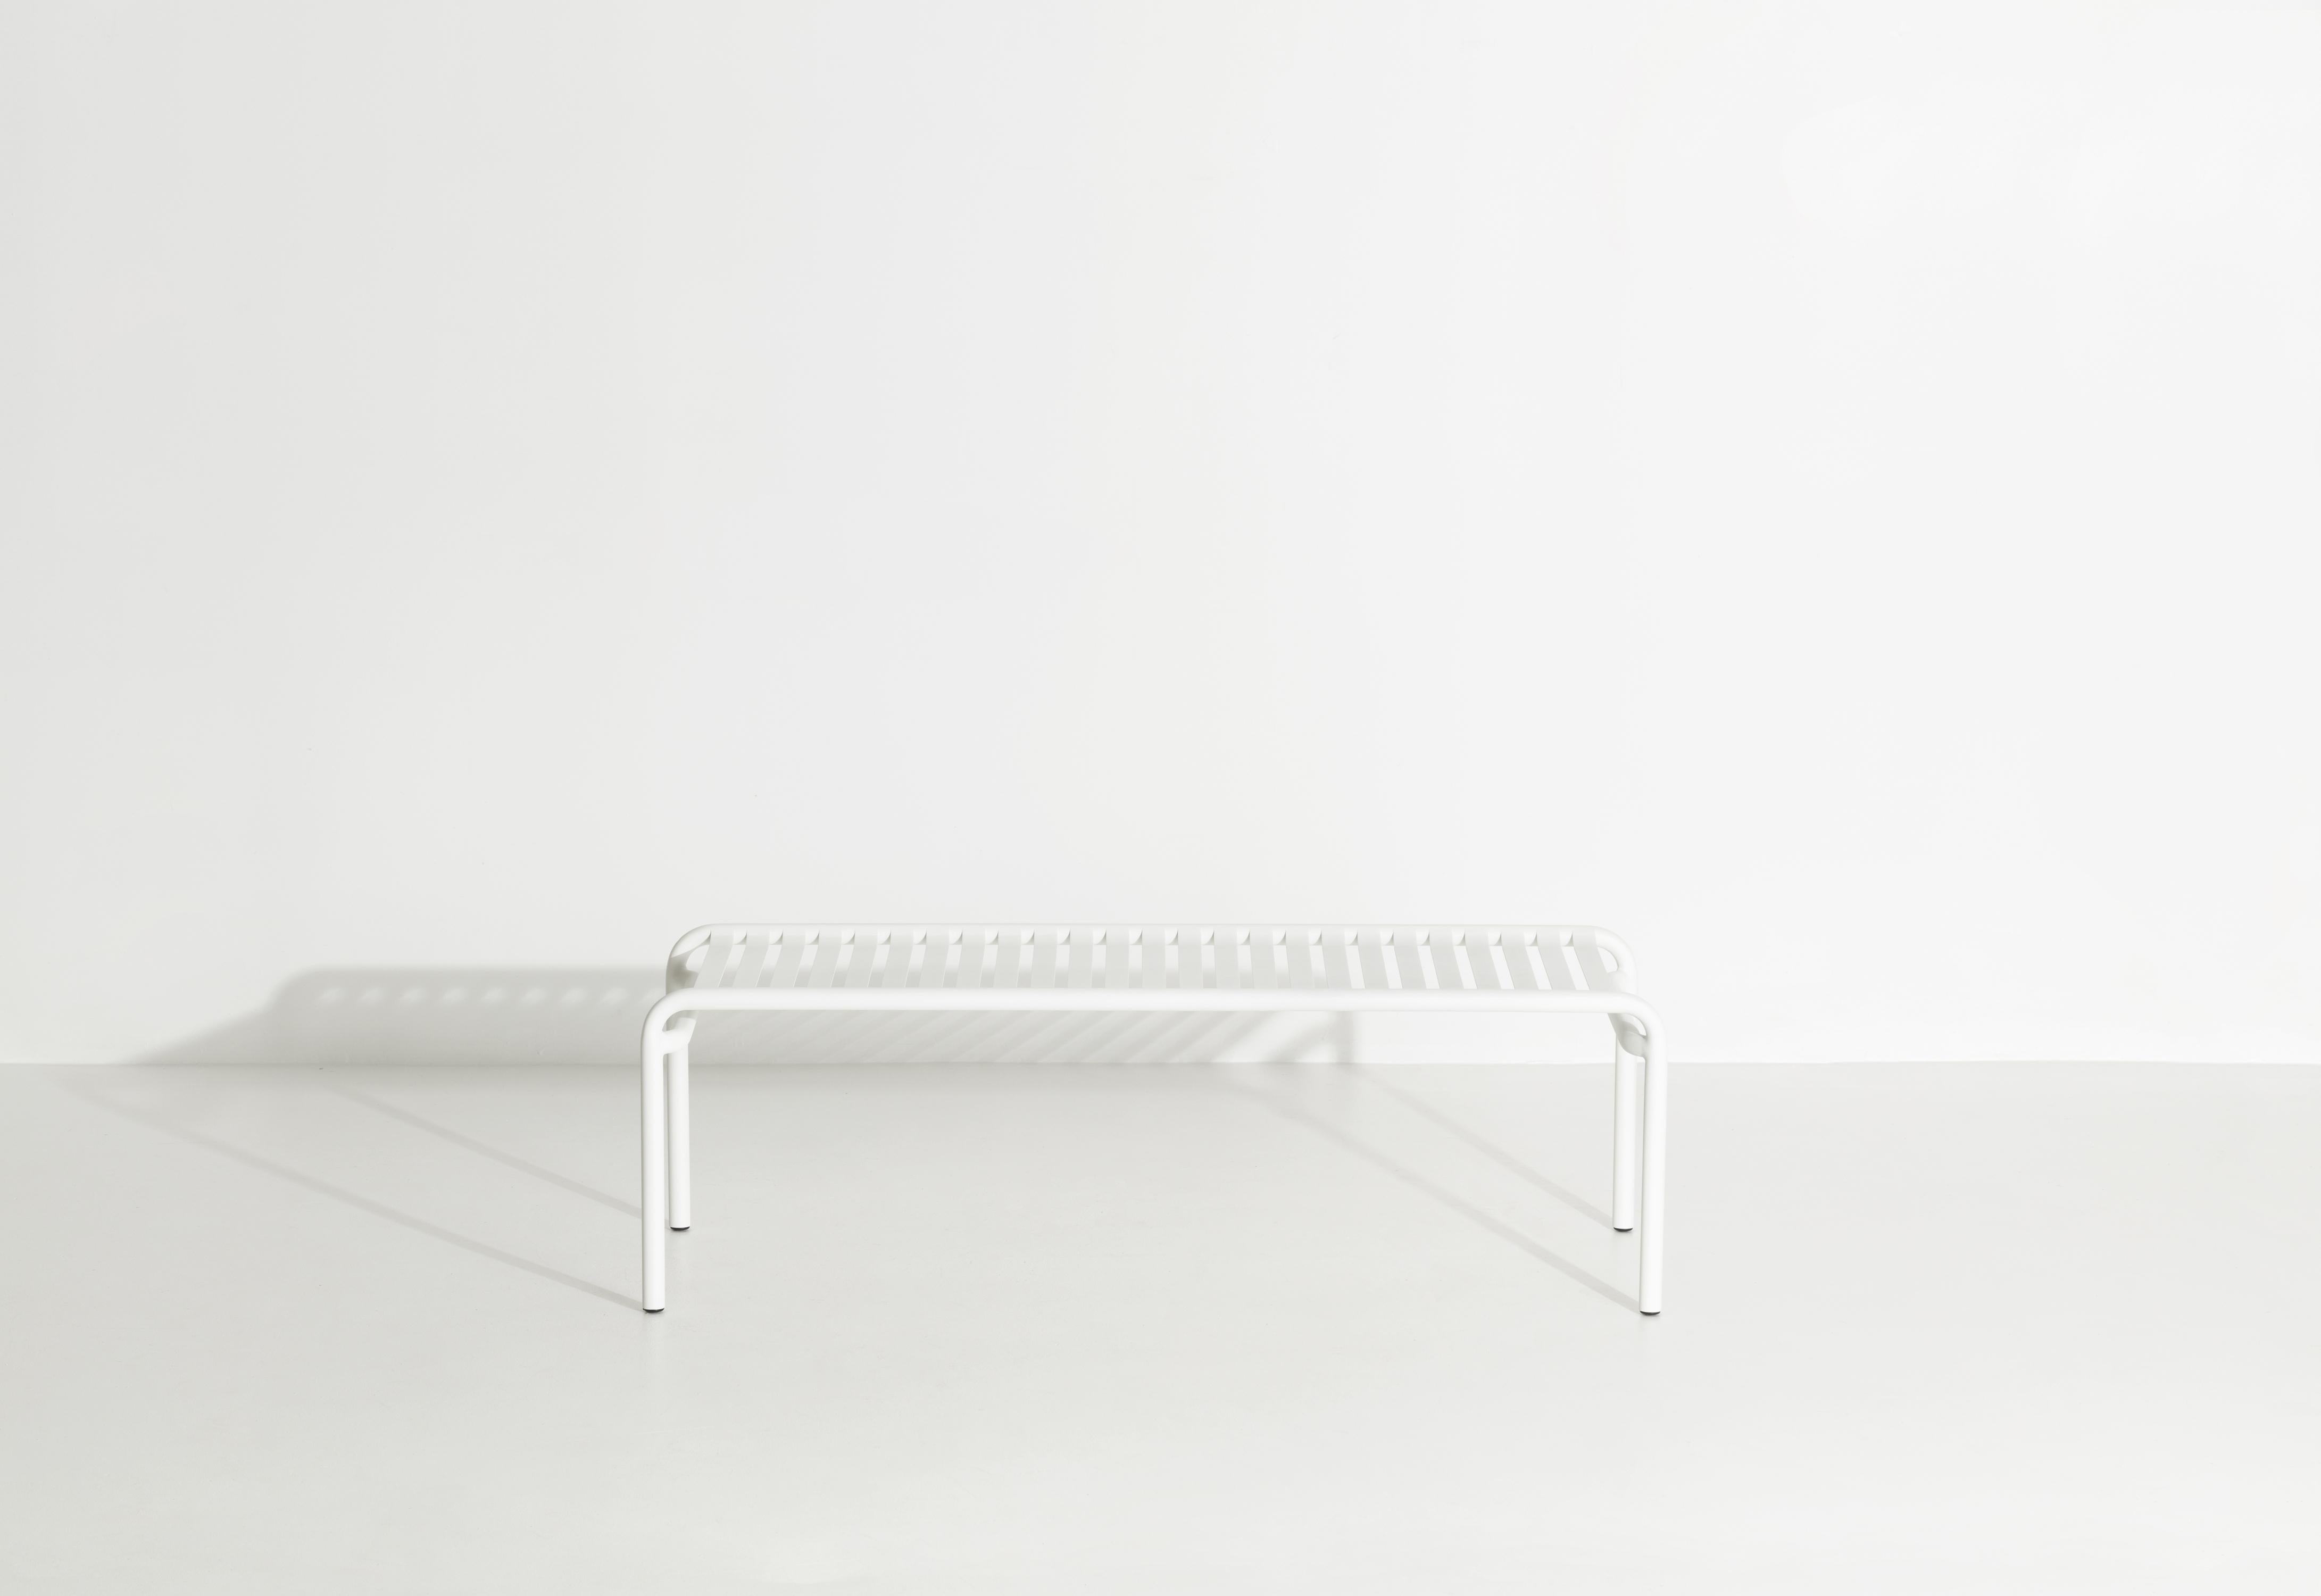 Contemporary Petite Friture Week-End Long Coffee Table in White Aluminium, 2017 For Sale